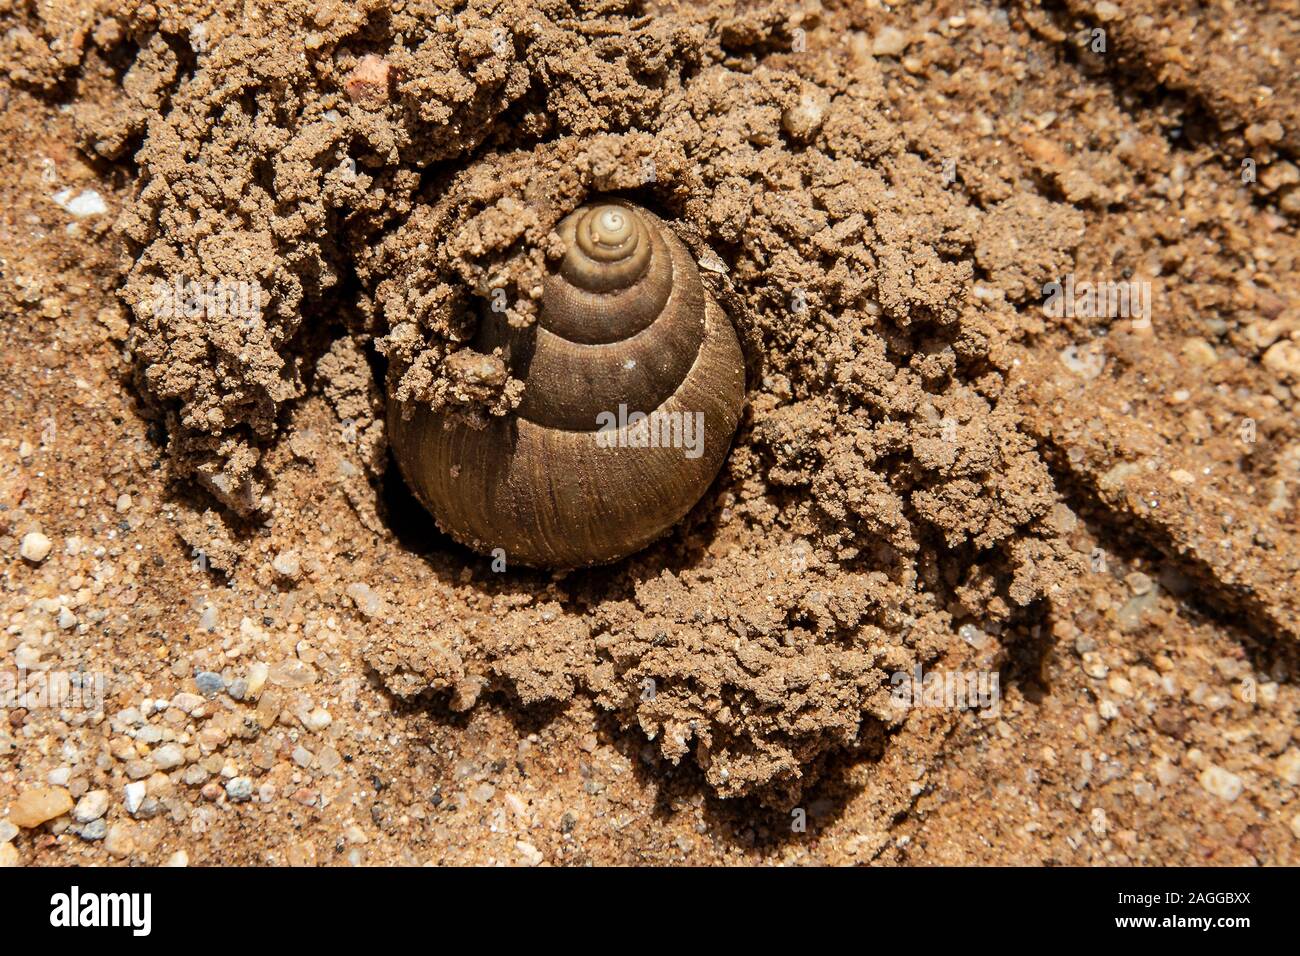 African snail burrowing into the sand after rain. Stock Photo